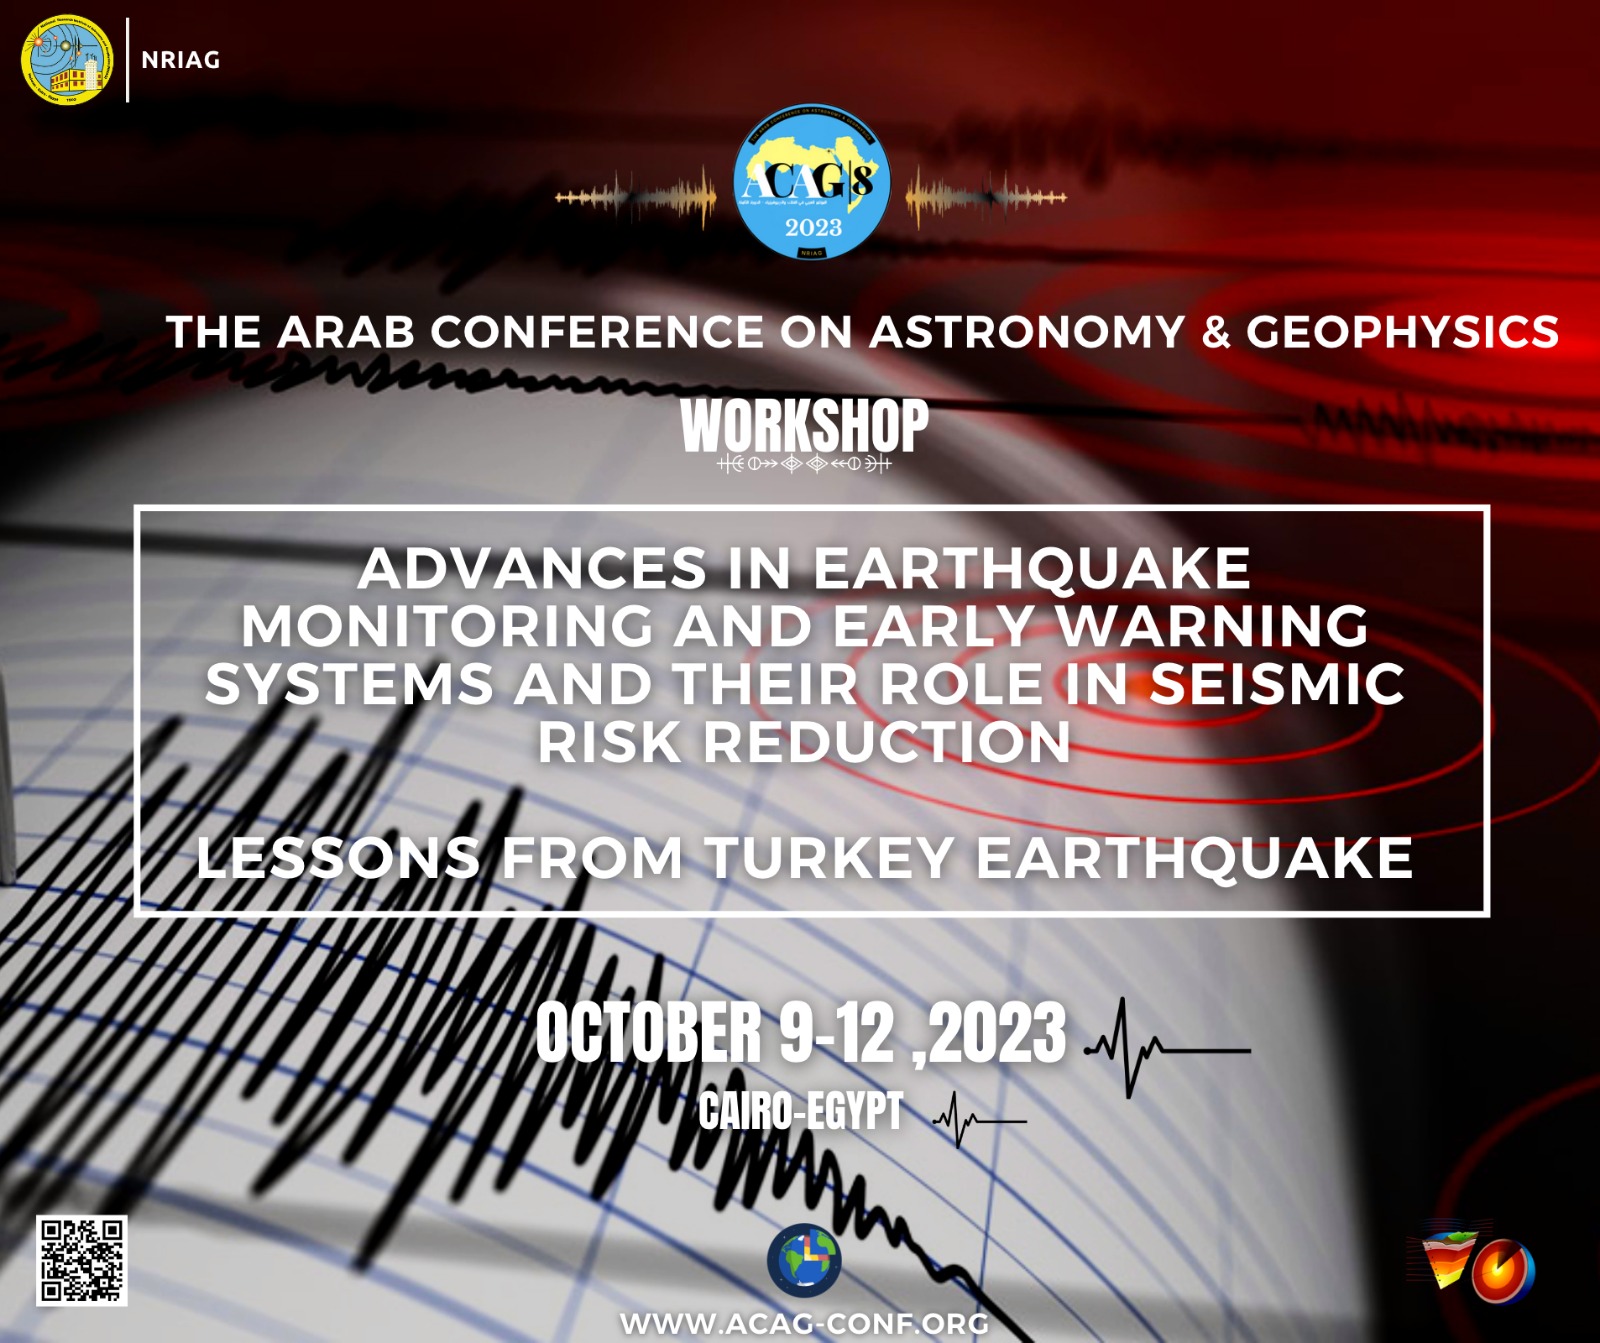 Advances in earthquake Monitoring and early warning systems and their role in seismic risk reduction lessons from Turkey earthquake